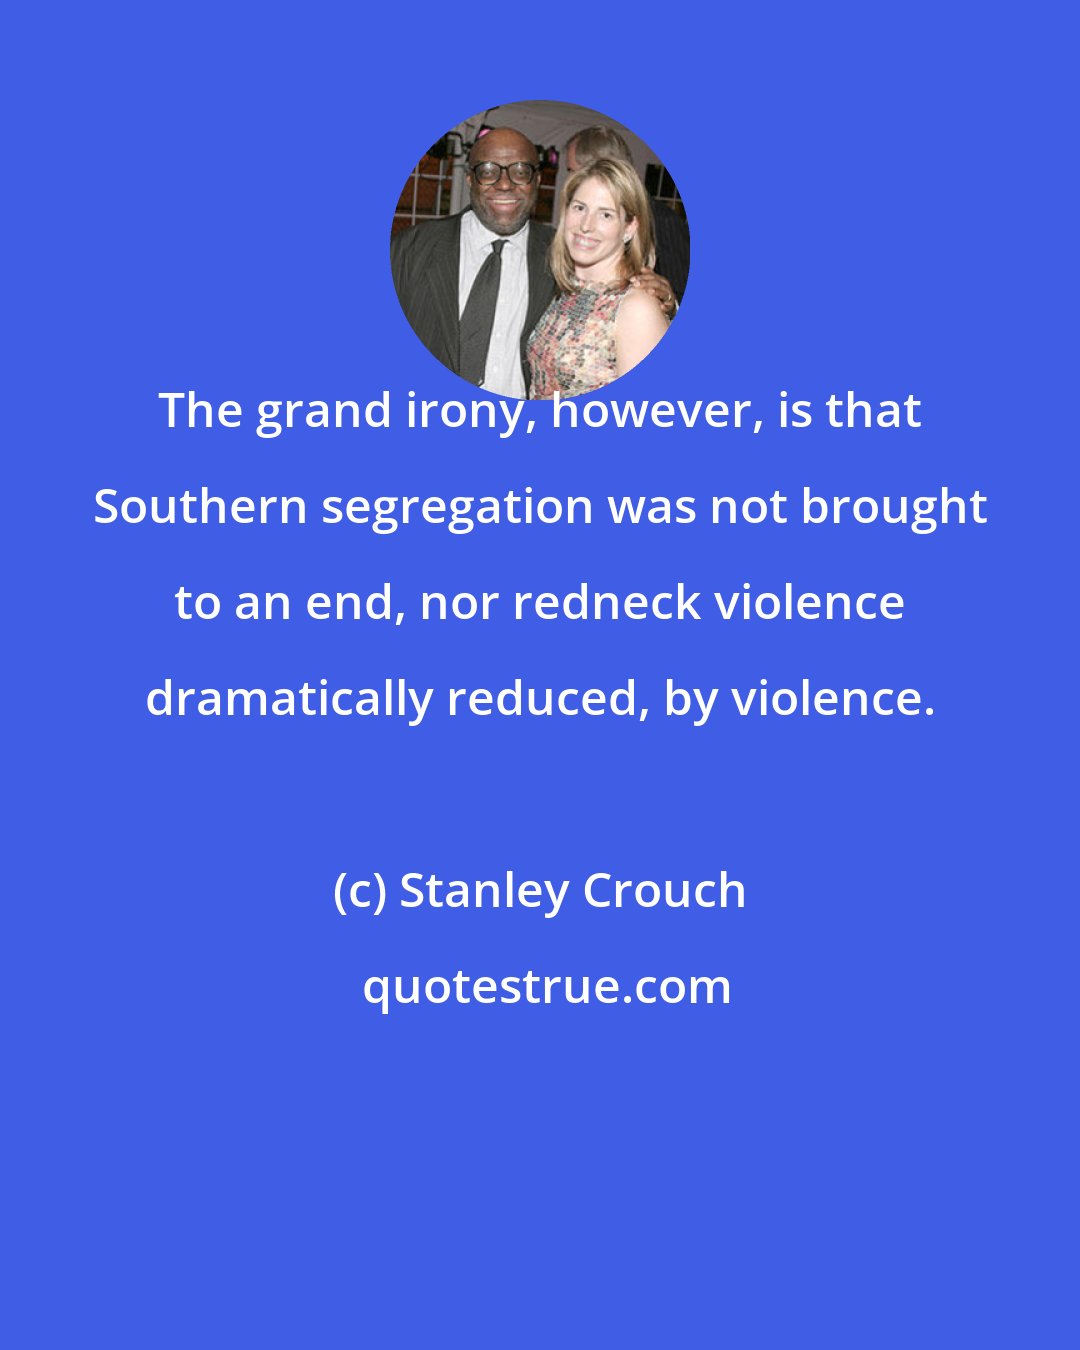 Stanley Crouch: The grand irony, however, is that Southern segregation was not brought to an end, nor redneck violence dramatically reduced, by violence.